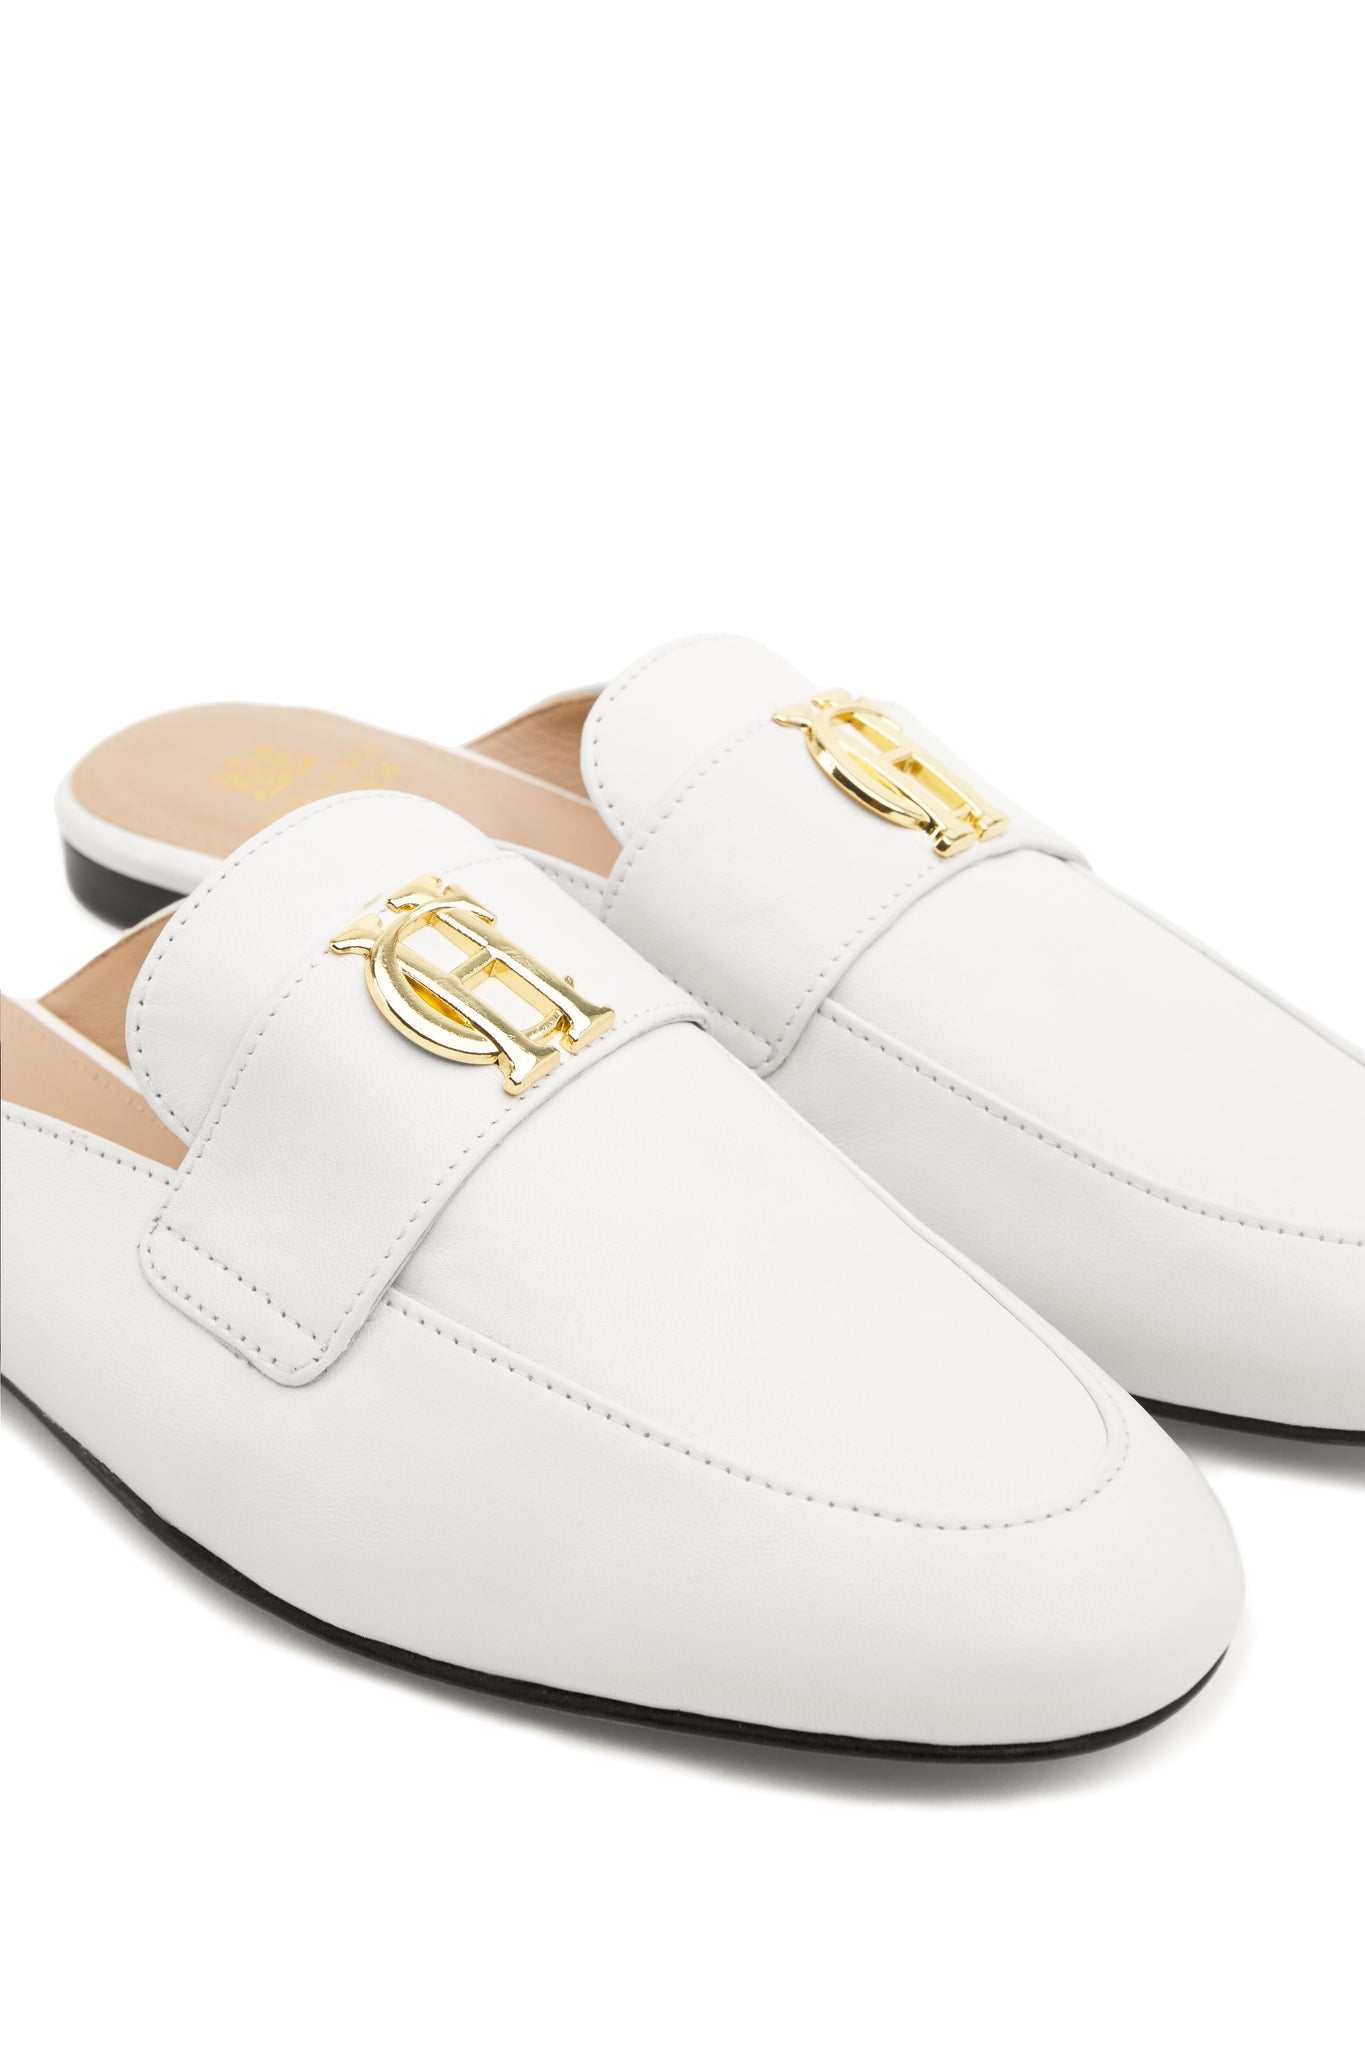 Close up of gold hardware on white leather backless loafers with a slightly pointed toe